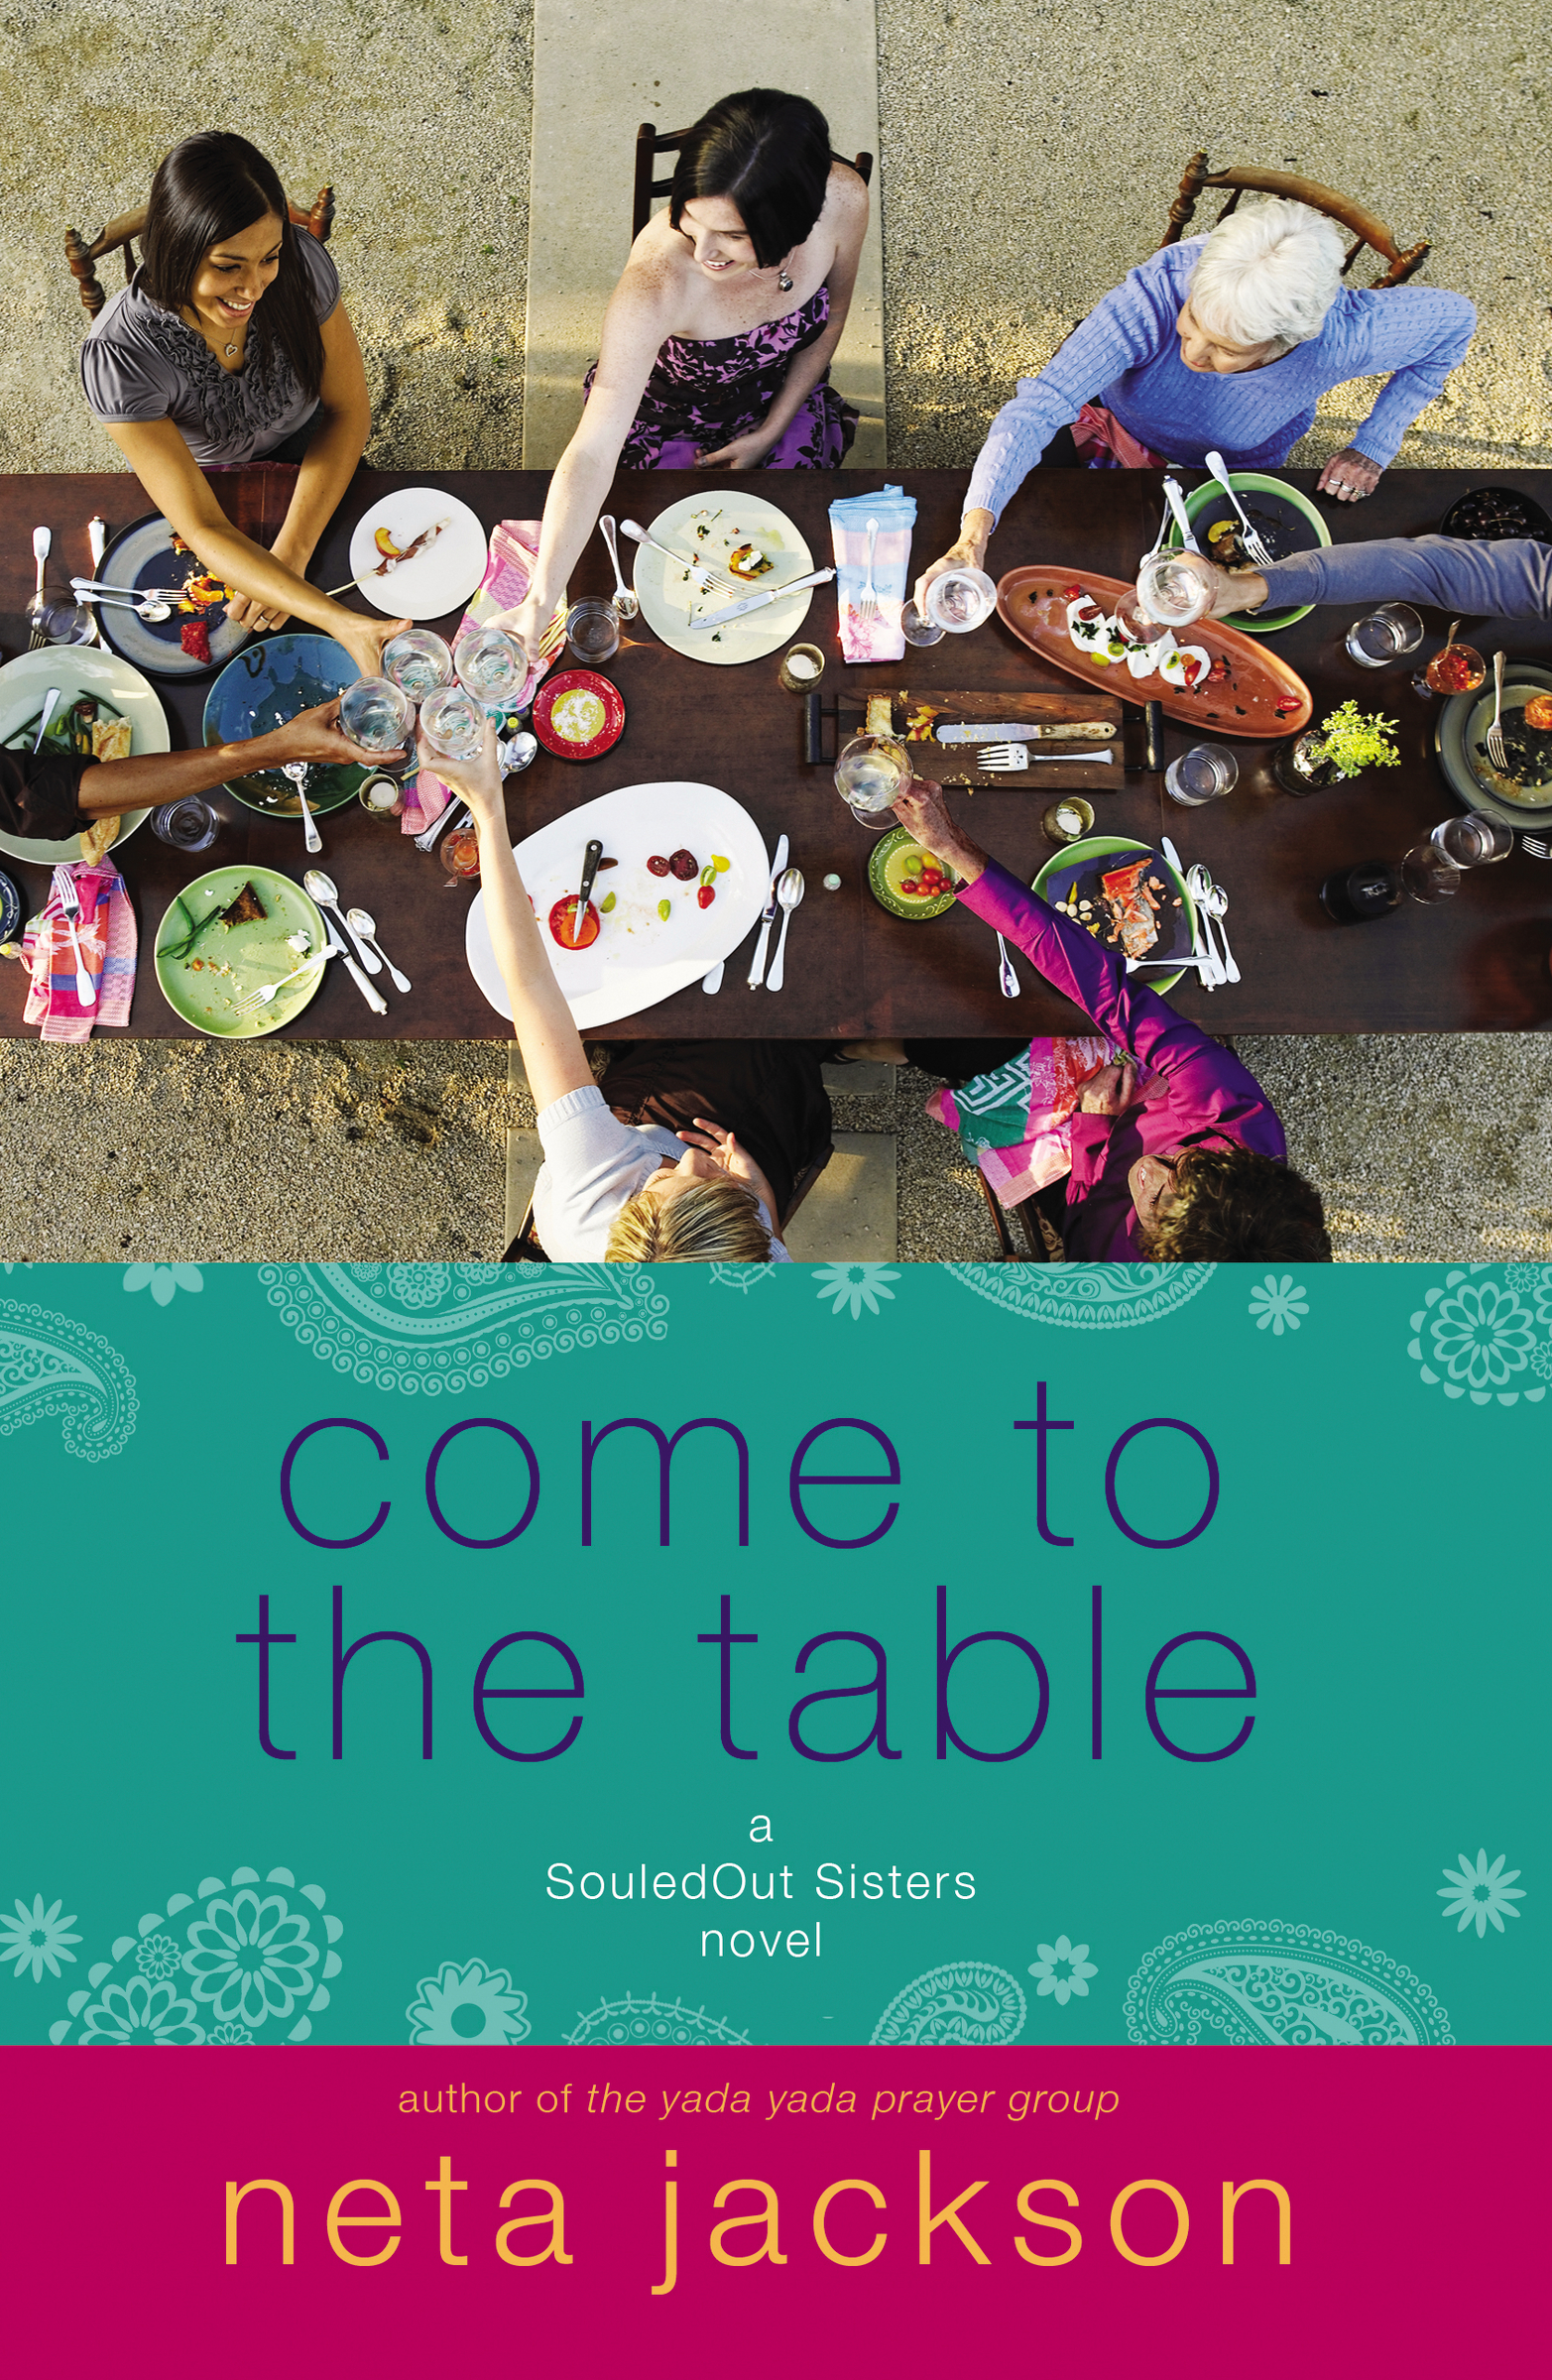 Come to the table cover image